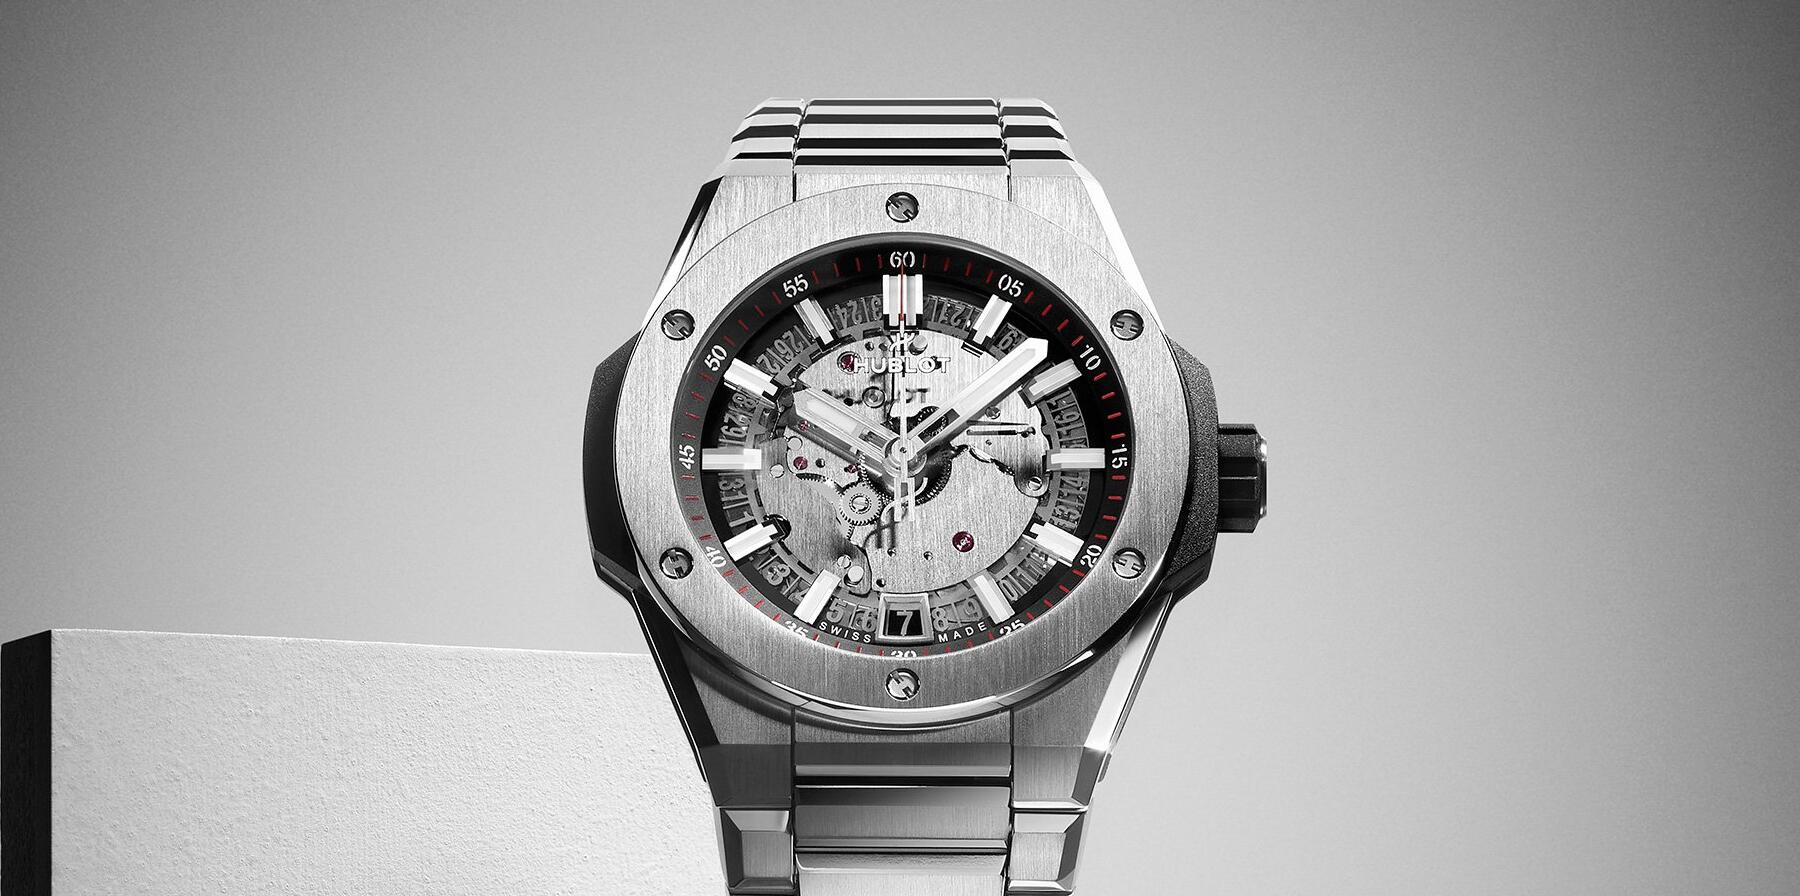 Replica Hublot Big Bang Integral Time Only in a modest 40 mm ...